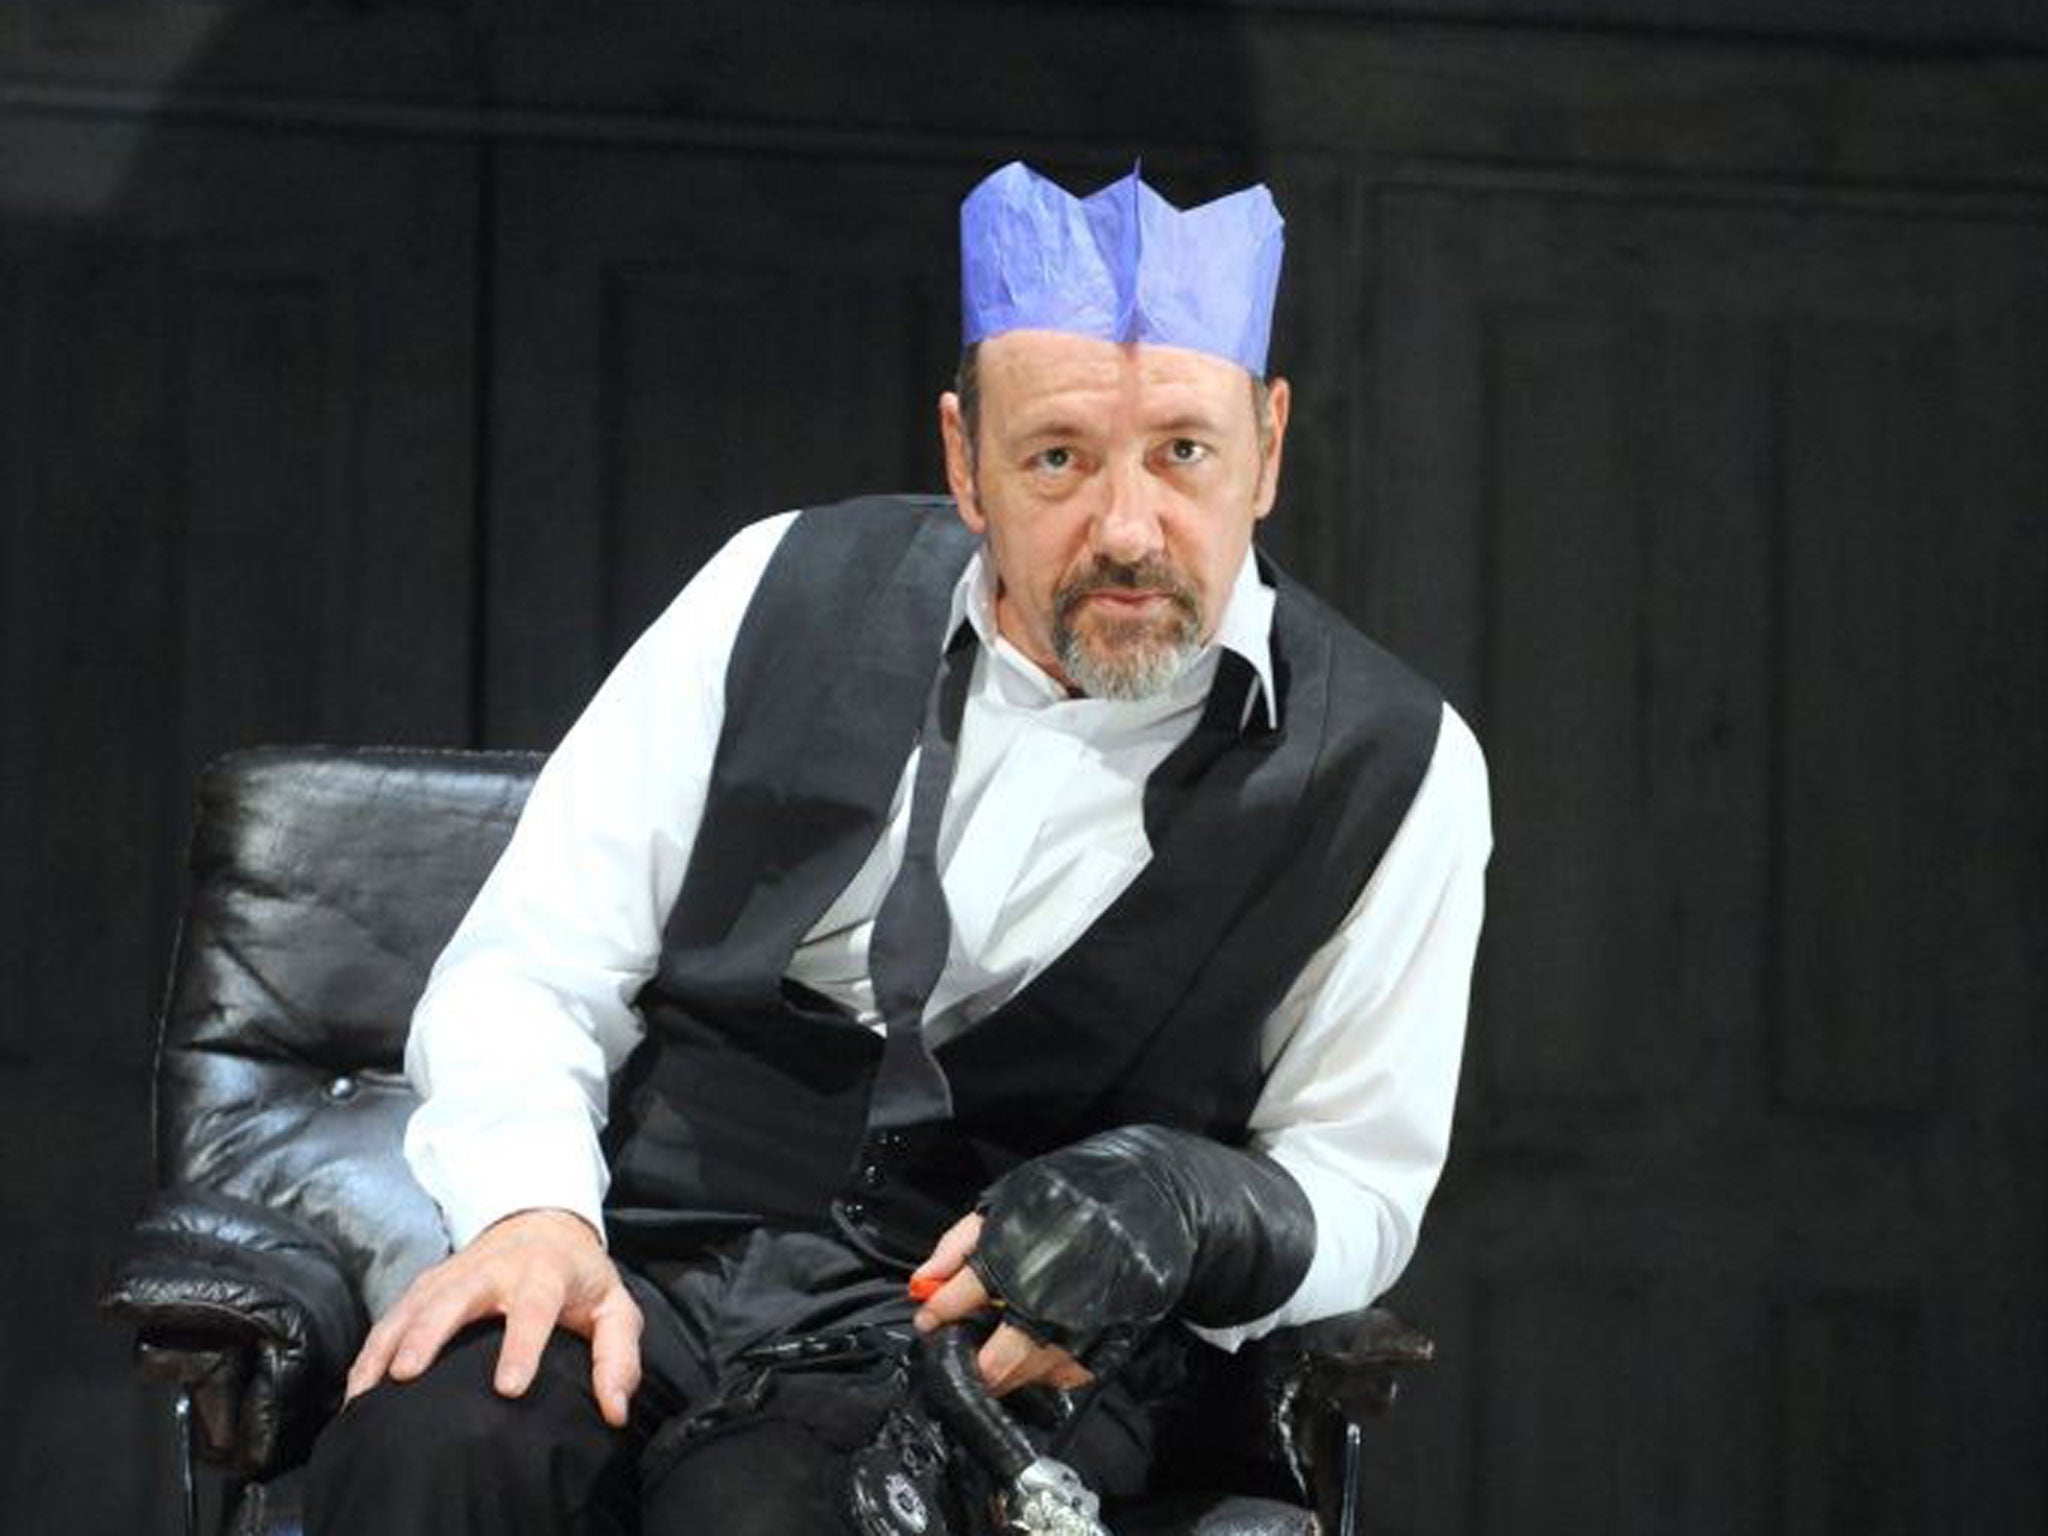 Kevin Spacey said he is "thrilled" to be returning to The Old Vic